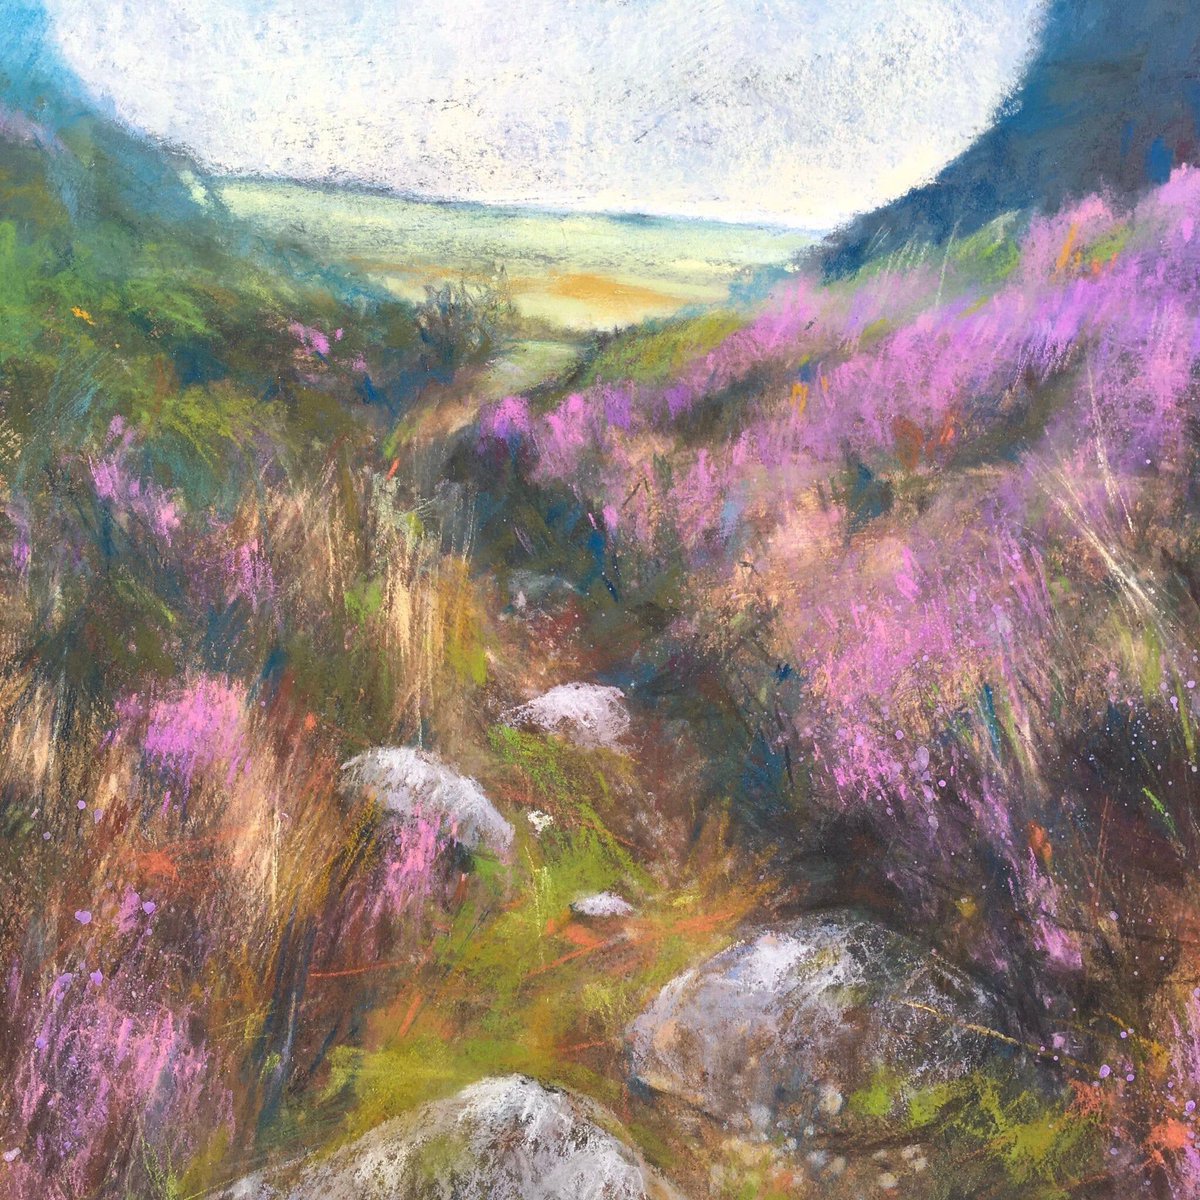 Delighted ‘Brecon Heather’ is heading to a new home, thanks to the #LionStreetGallery #HayeOnWye
#pastelpainting #drymedium #charcoal #pastel #heather #BreconBeacons #landscapeart